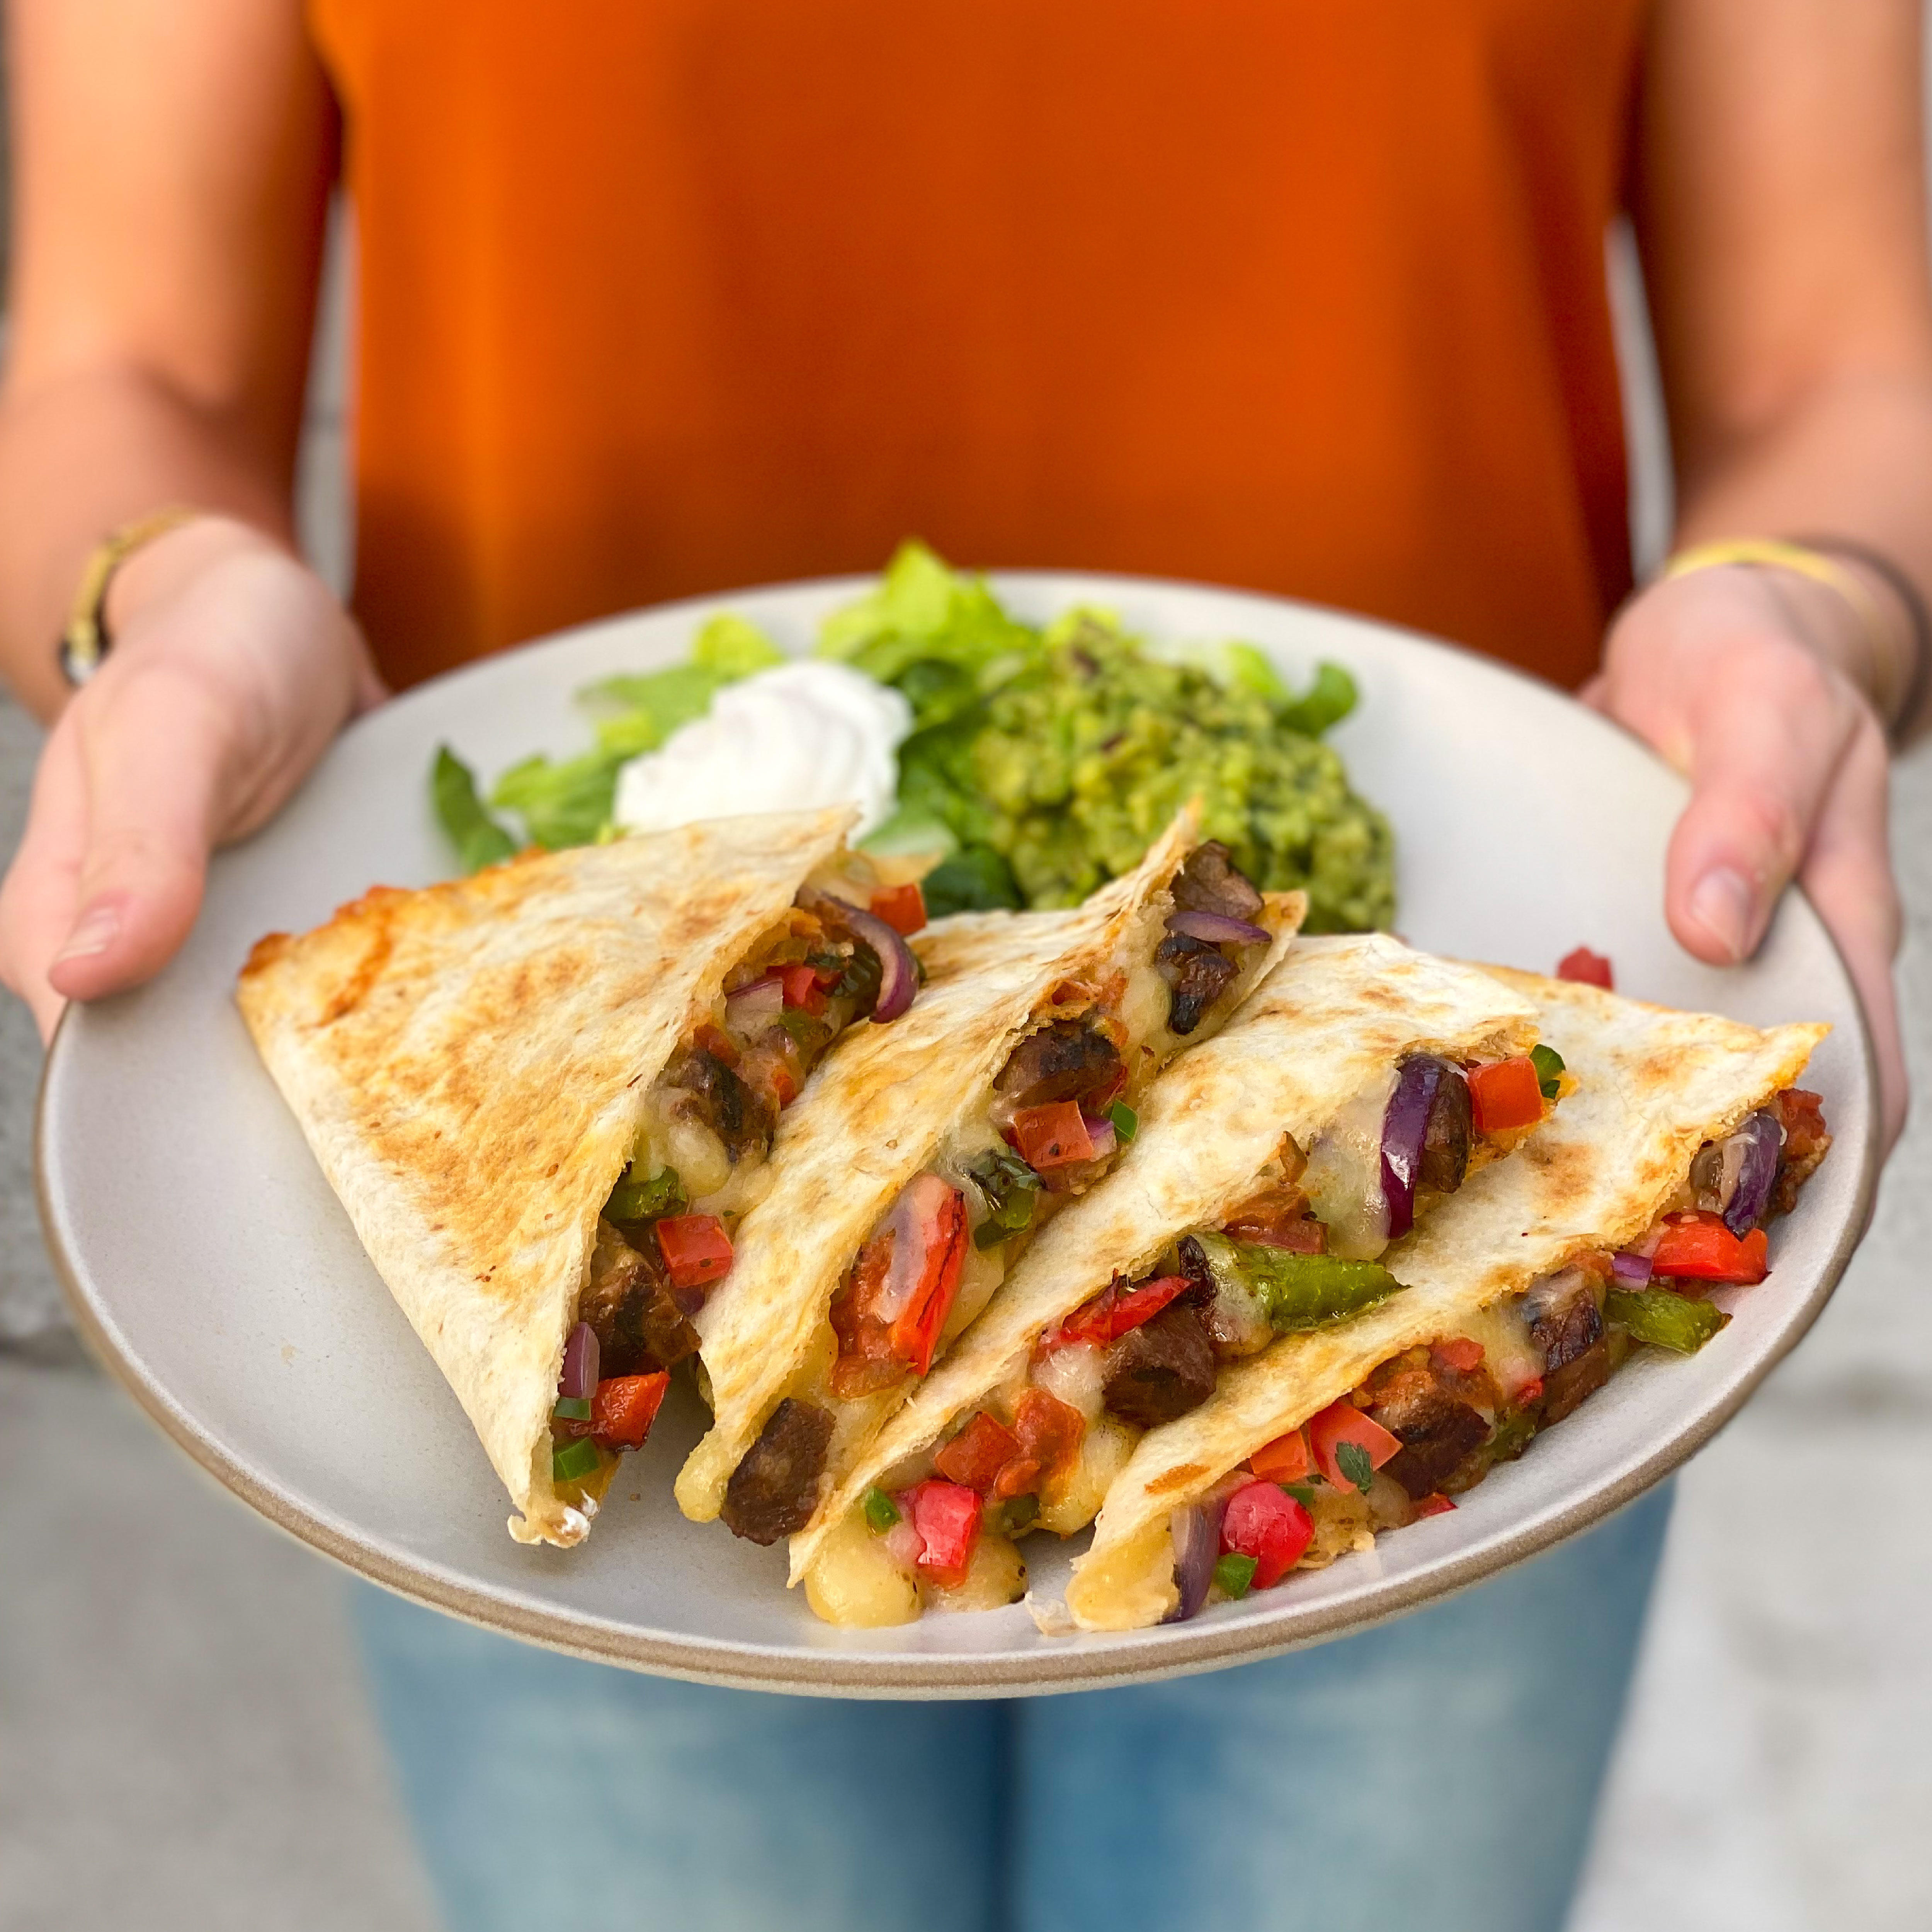 Grilled quesadillas are stuffed with chef-selected ingredients like grilled steak and hand-sliced, sauteÌed-in-house fajita vegetables.